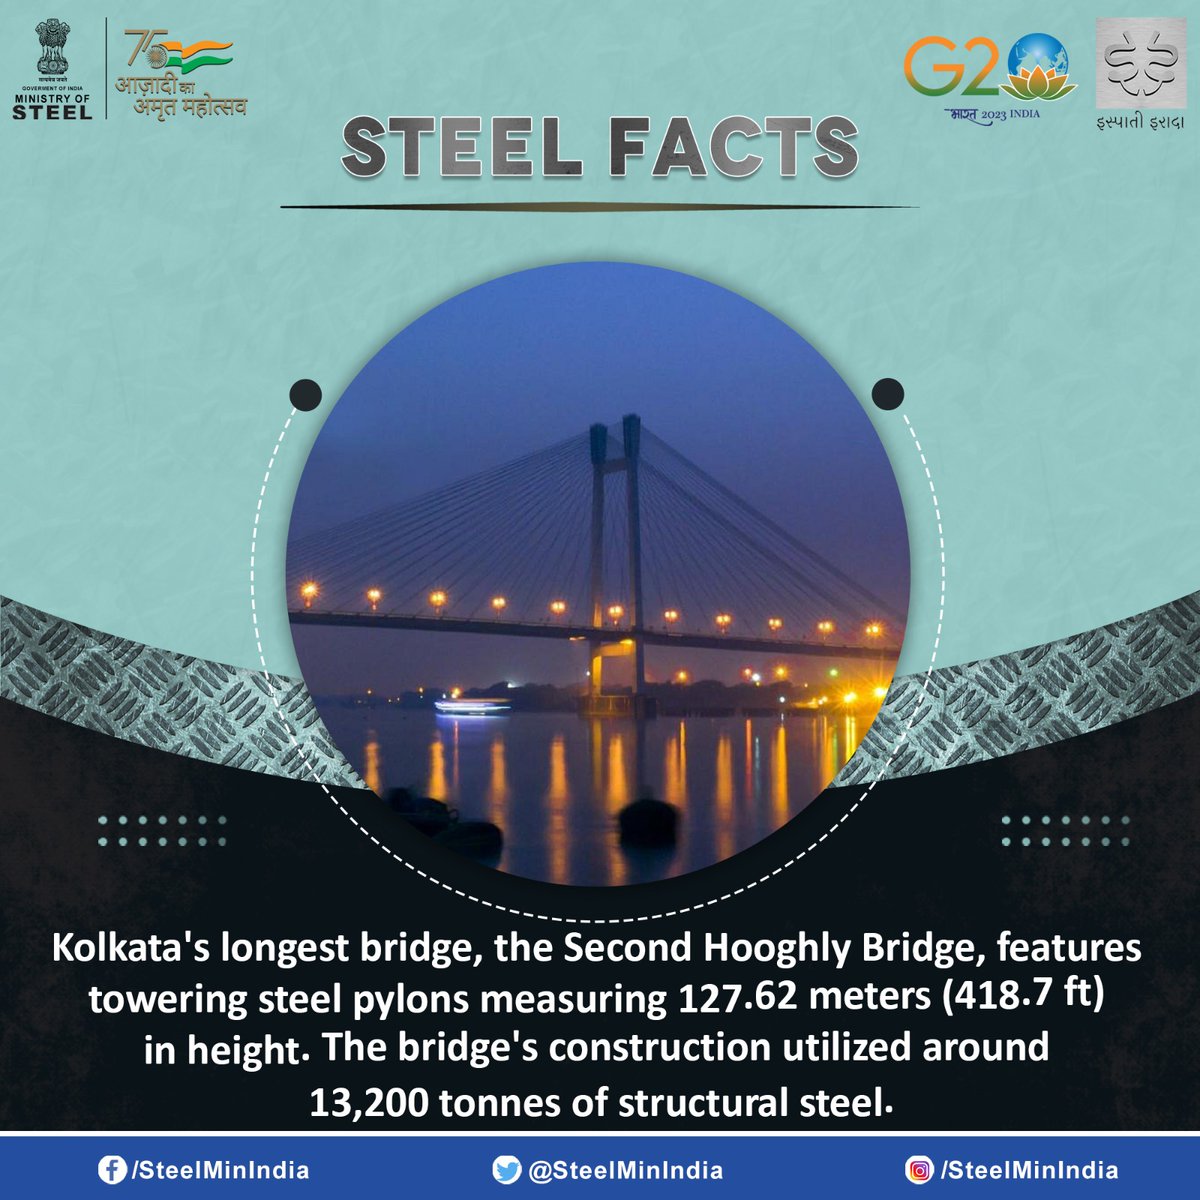 Check out these incredible steel facts and learn why it's the backbone of modern industry!

#SteelIndustry #Amazing #Facts #SteelFacts #Strength #Versatility